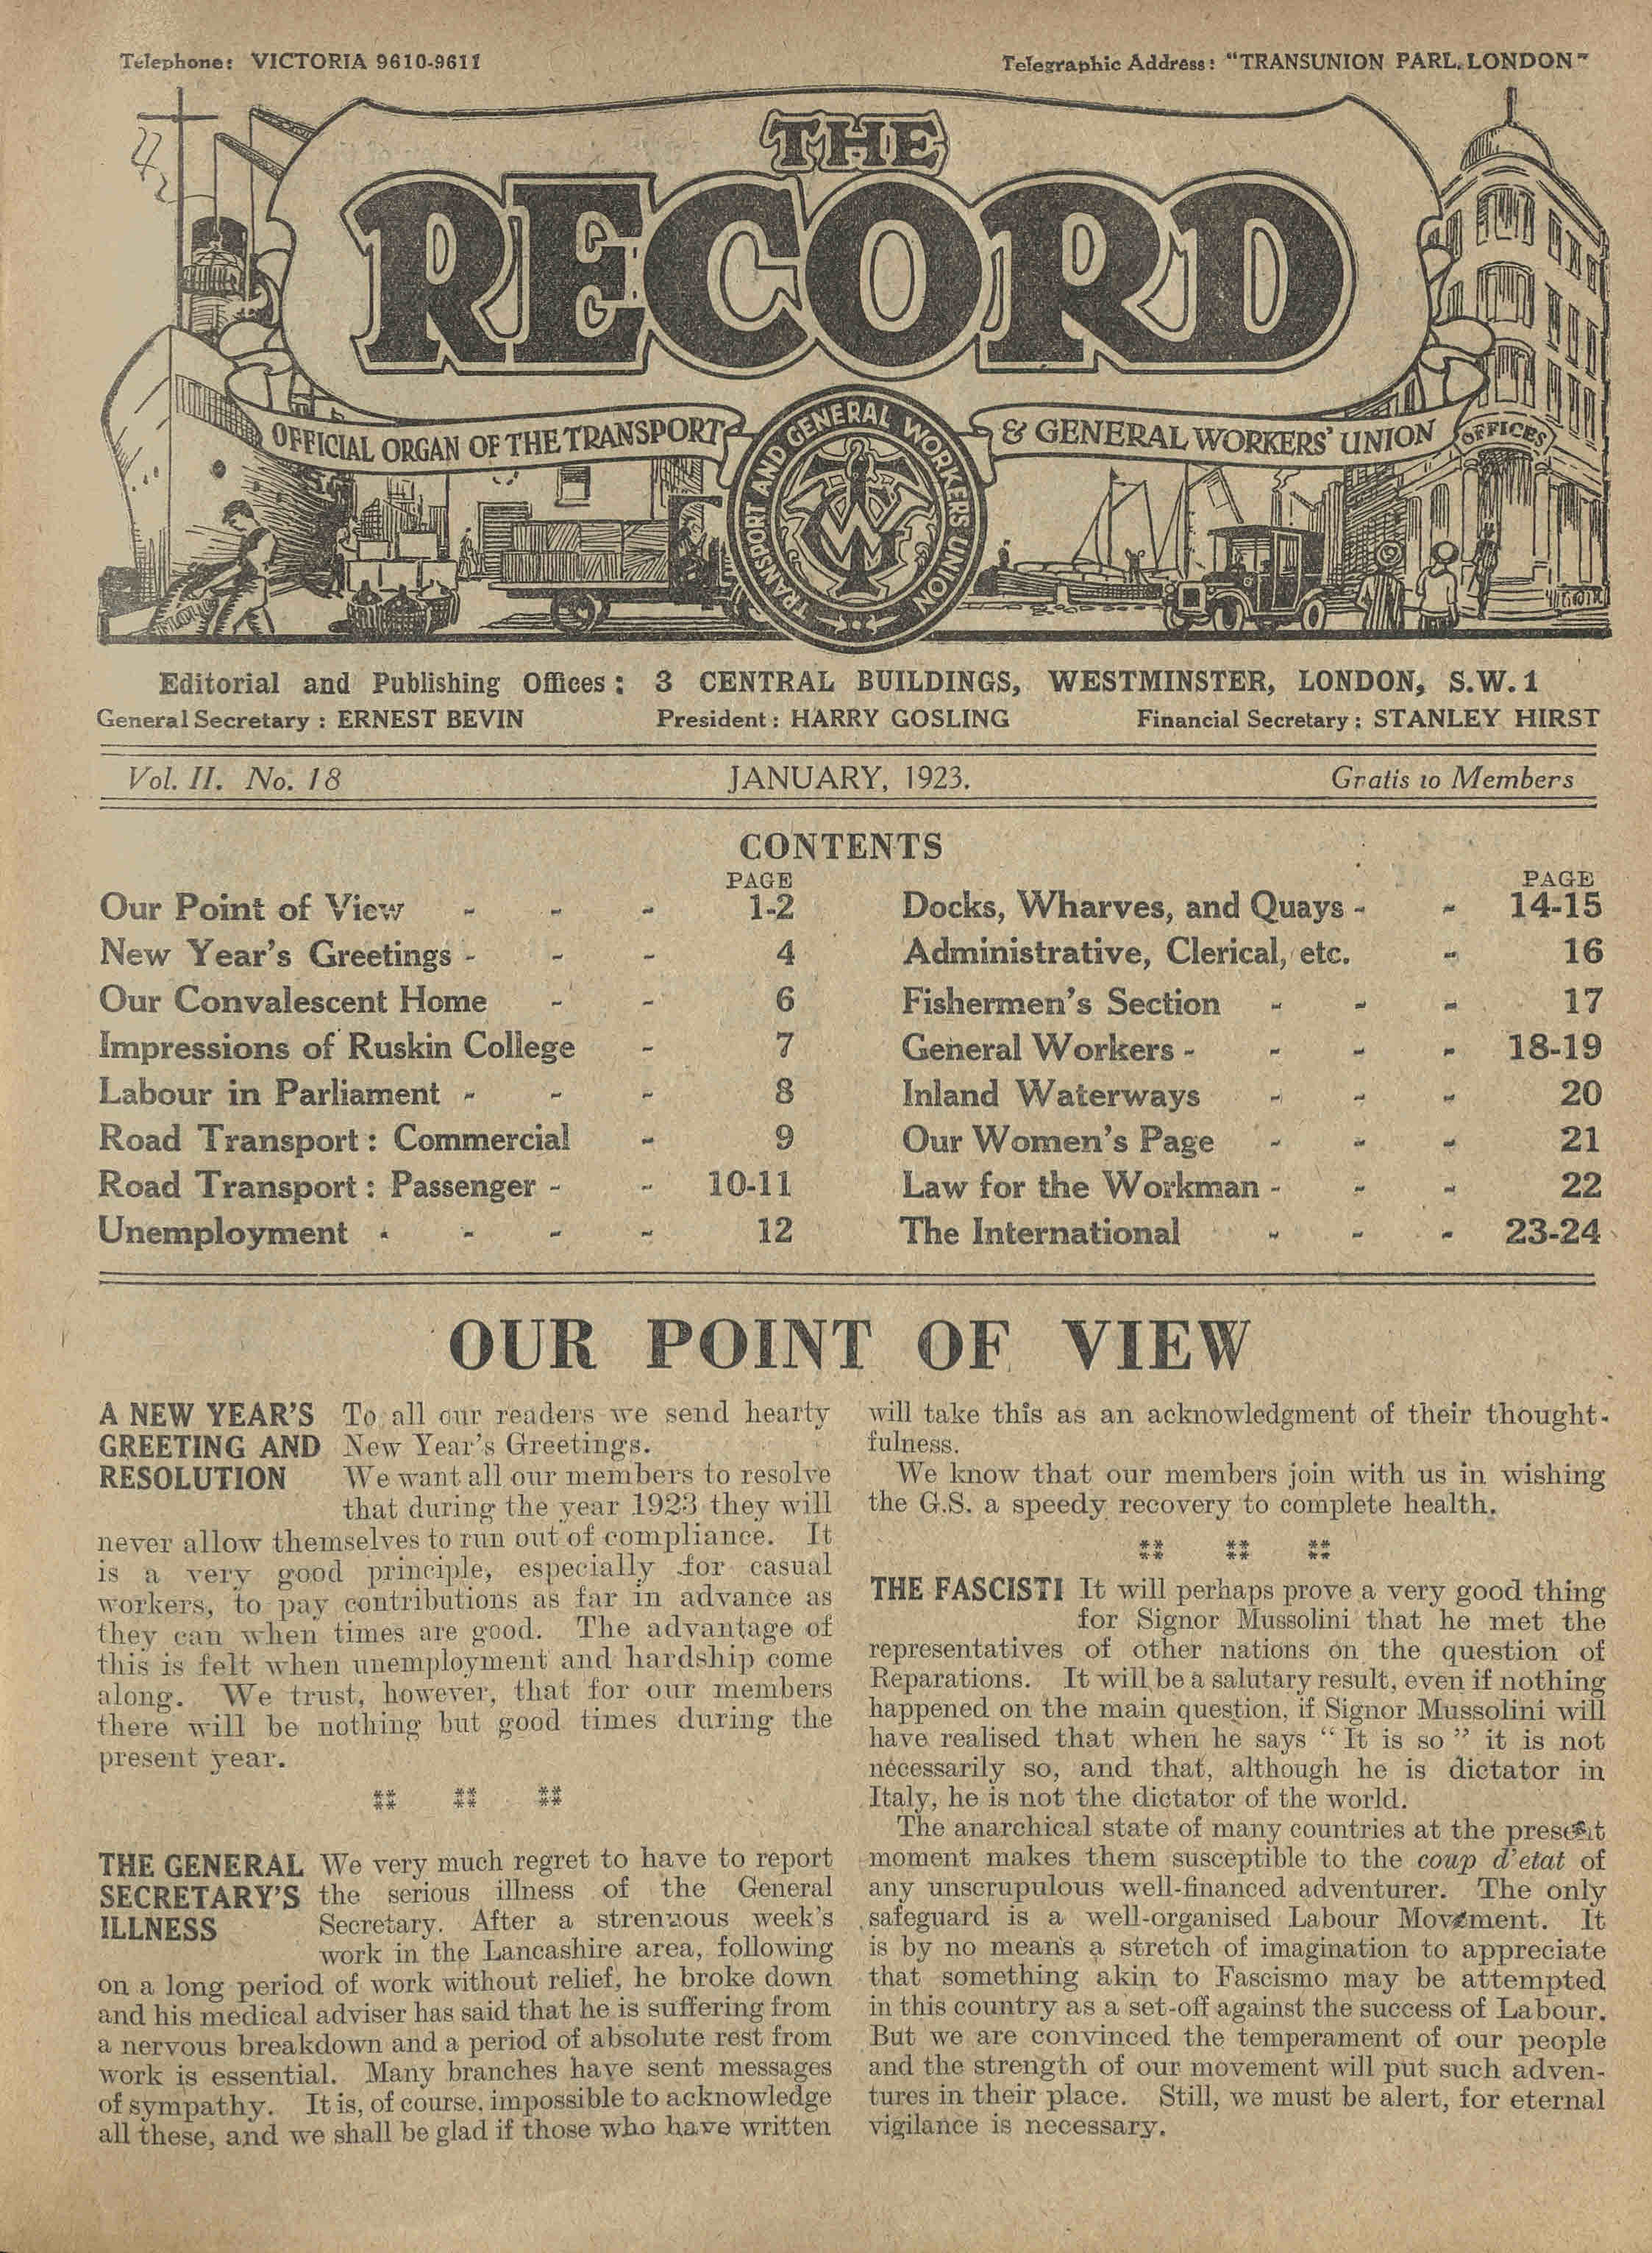 Front page of The Record, Jan 1923